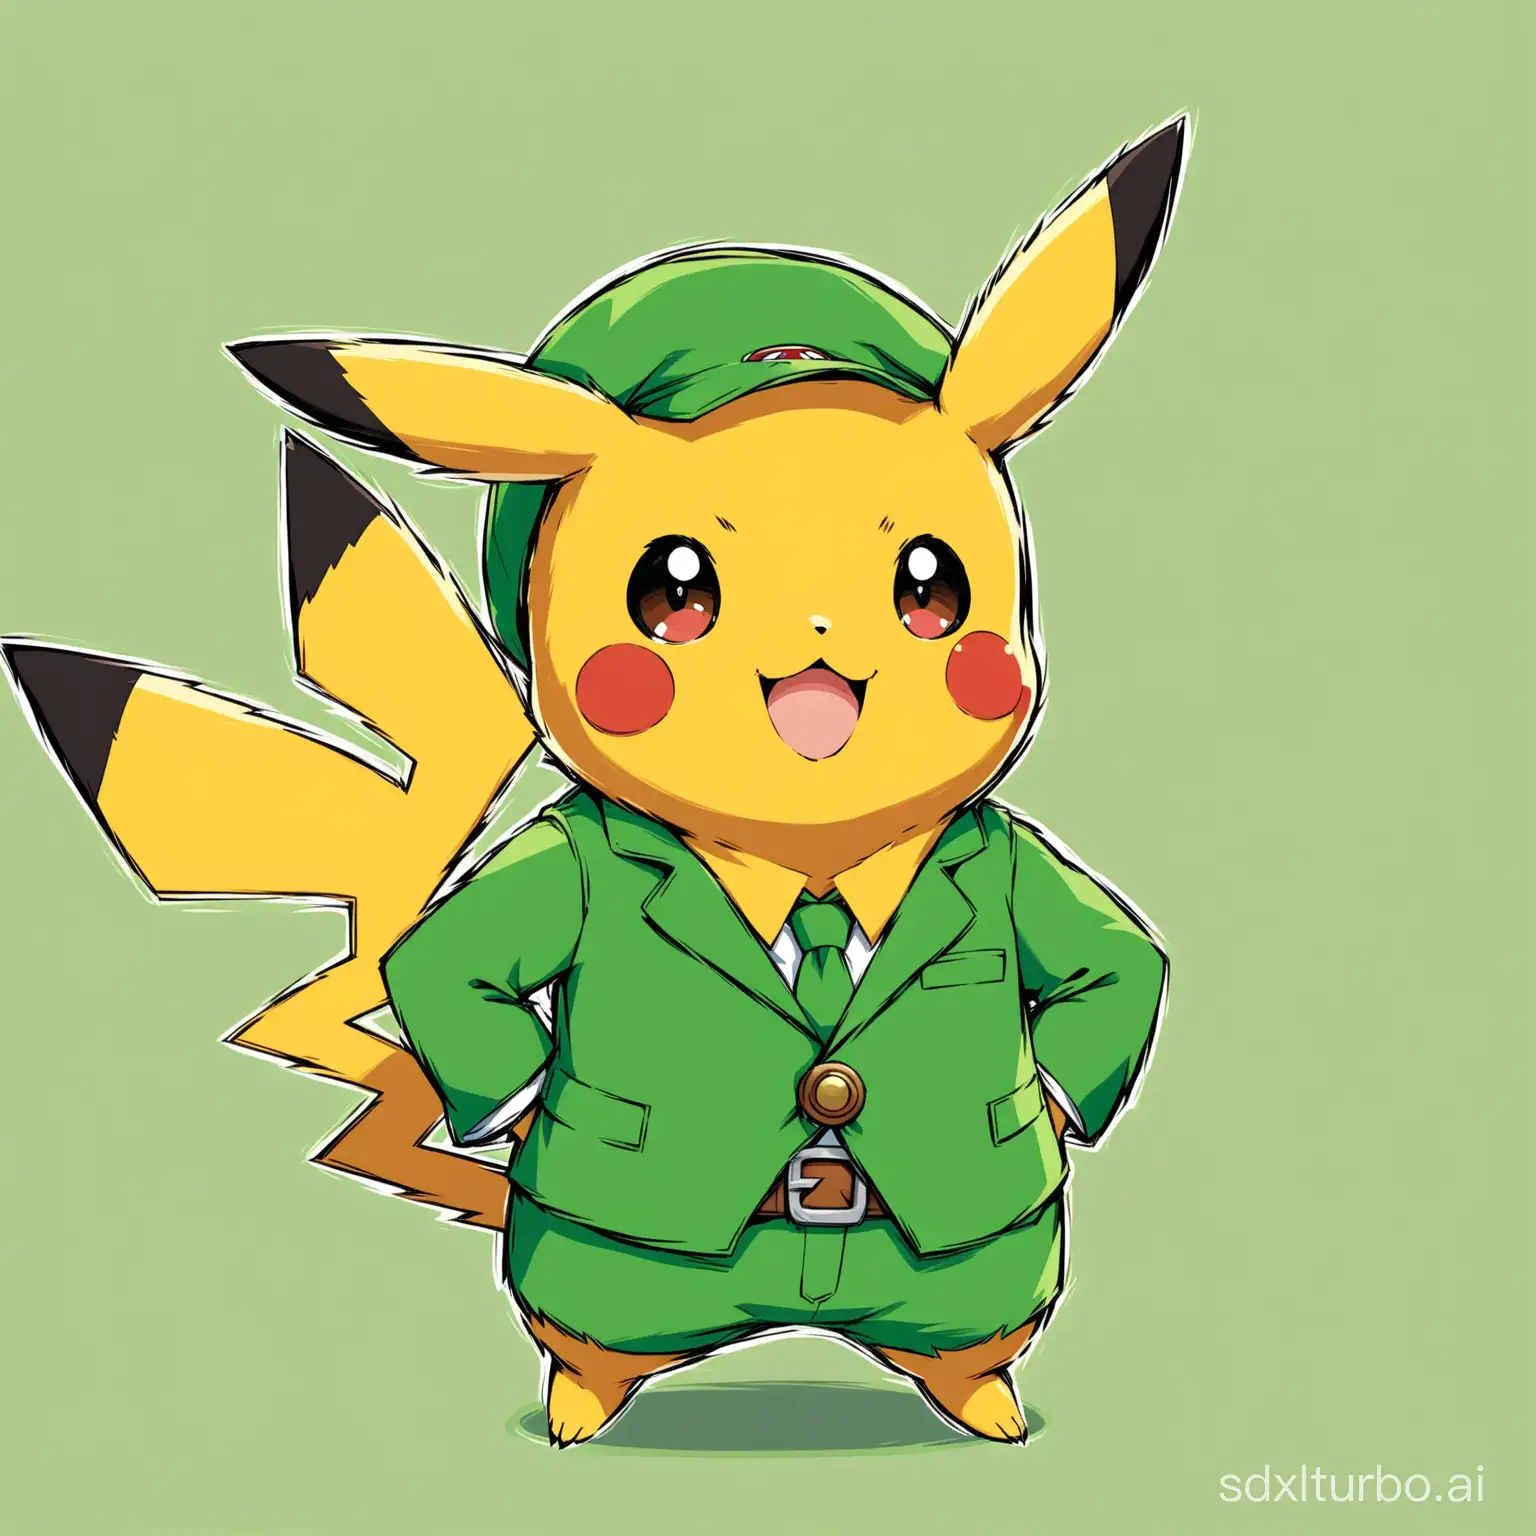 Cheerful-Pikachu-in-Links-Iconic-Green-Outfit-from-The-Legend-of-Zelda